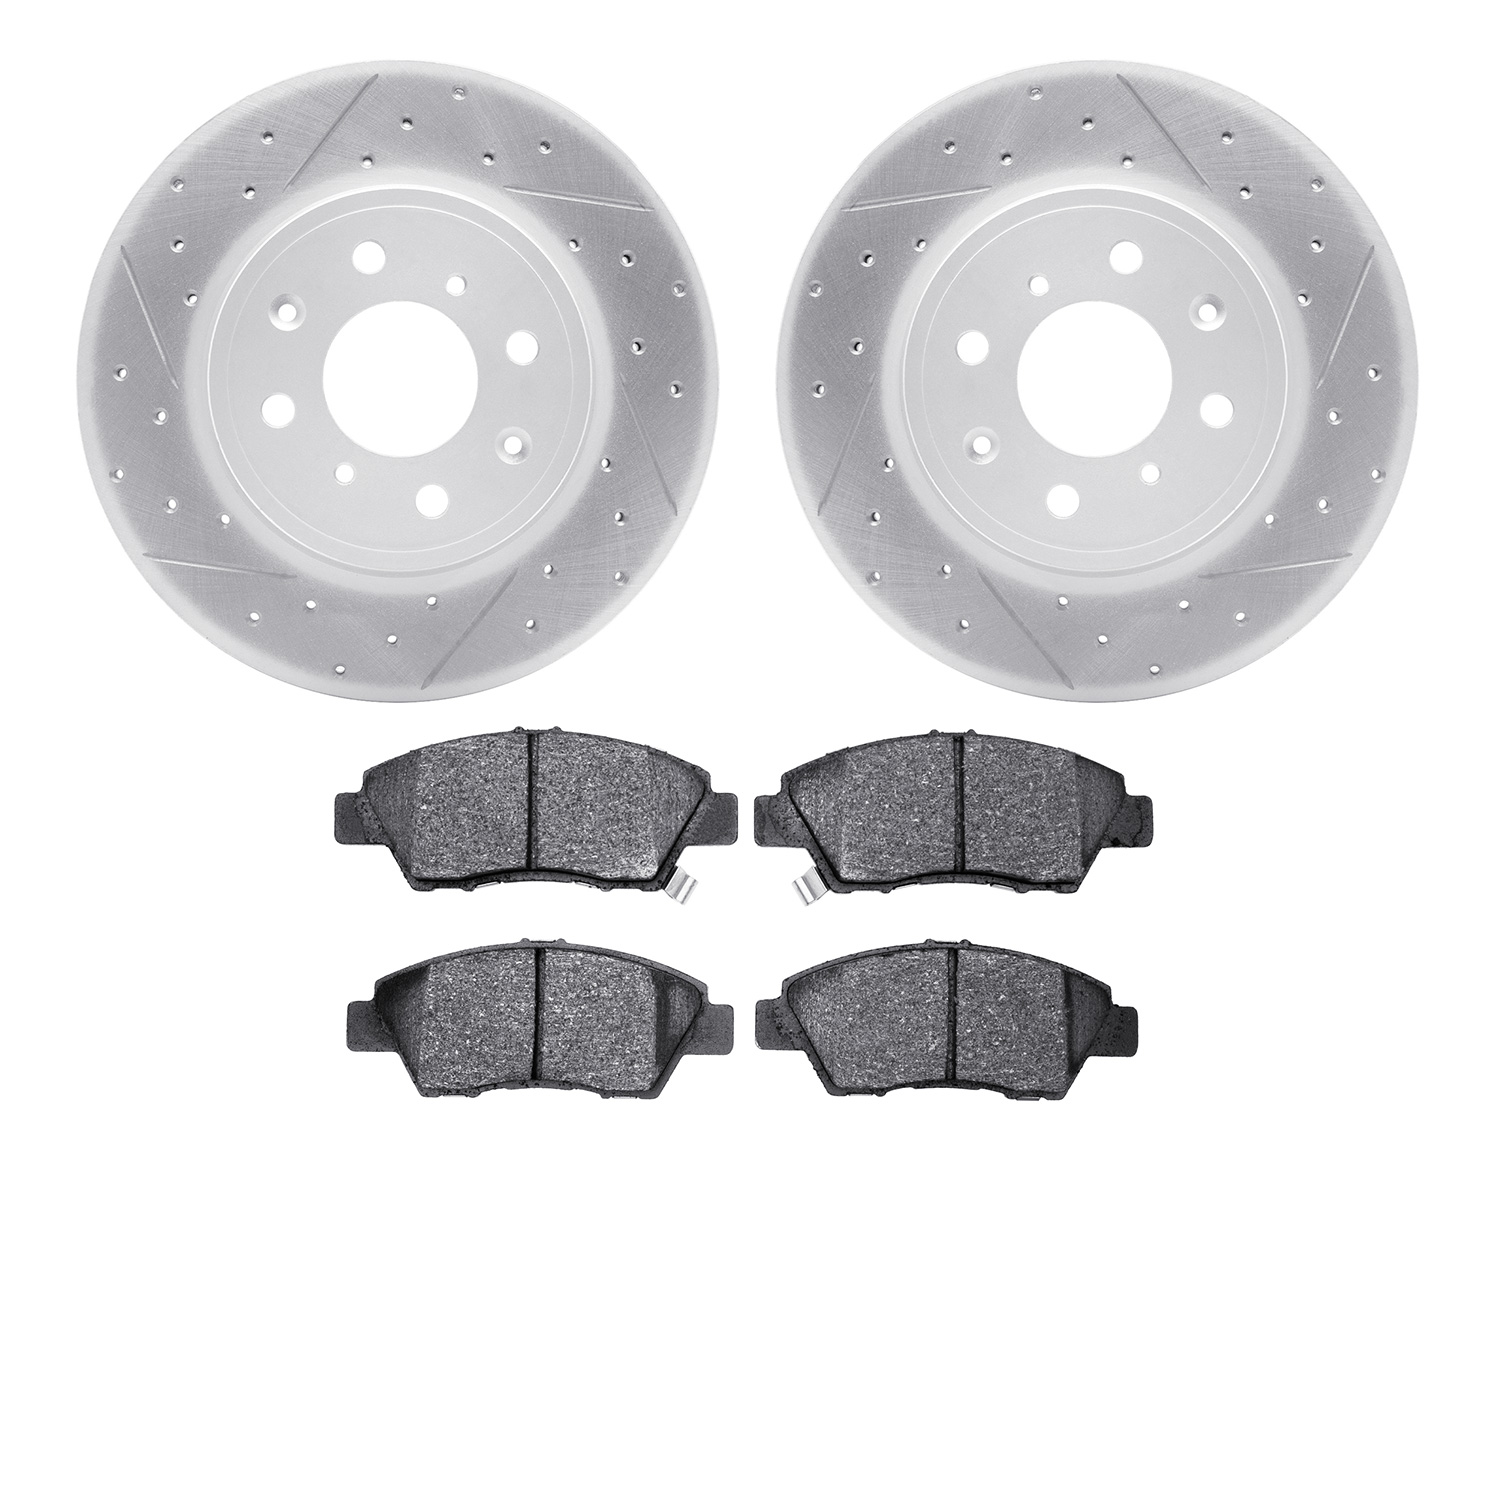 2502-59041 Geoperformance Drilled/Slotted Rotors w/5000 Advanced Brake Pads Kit, 2014-2020 Acura/Honda, Position: Front